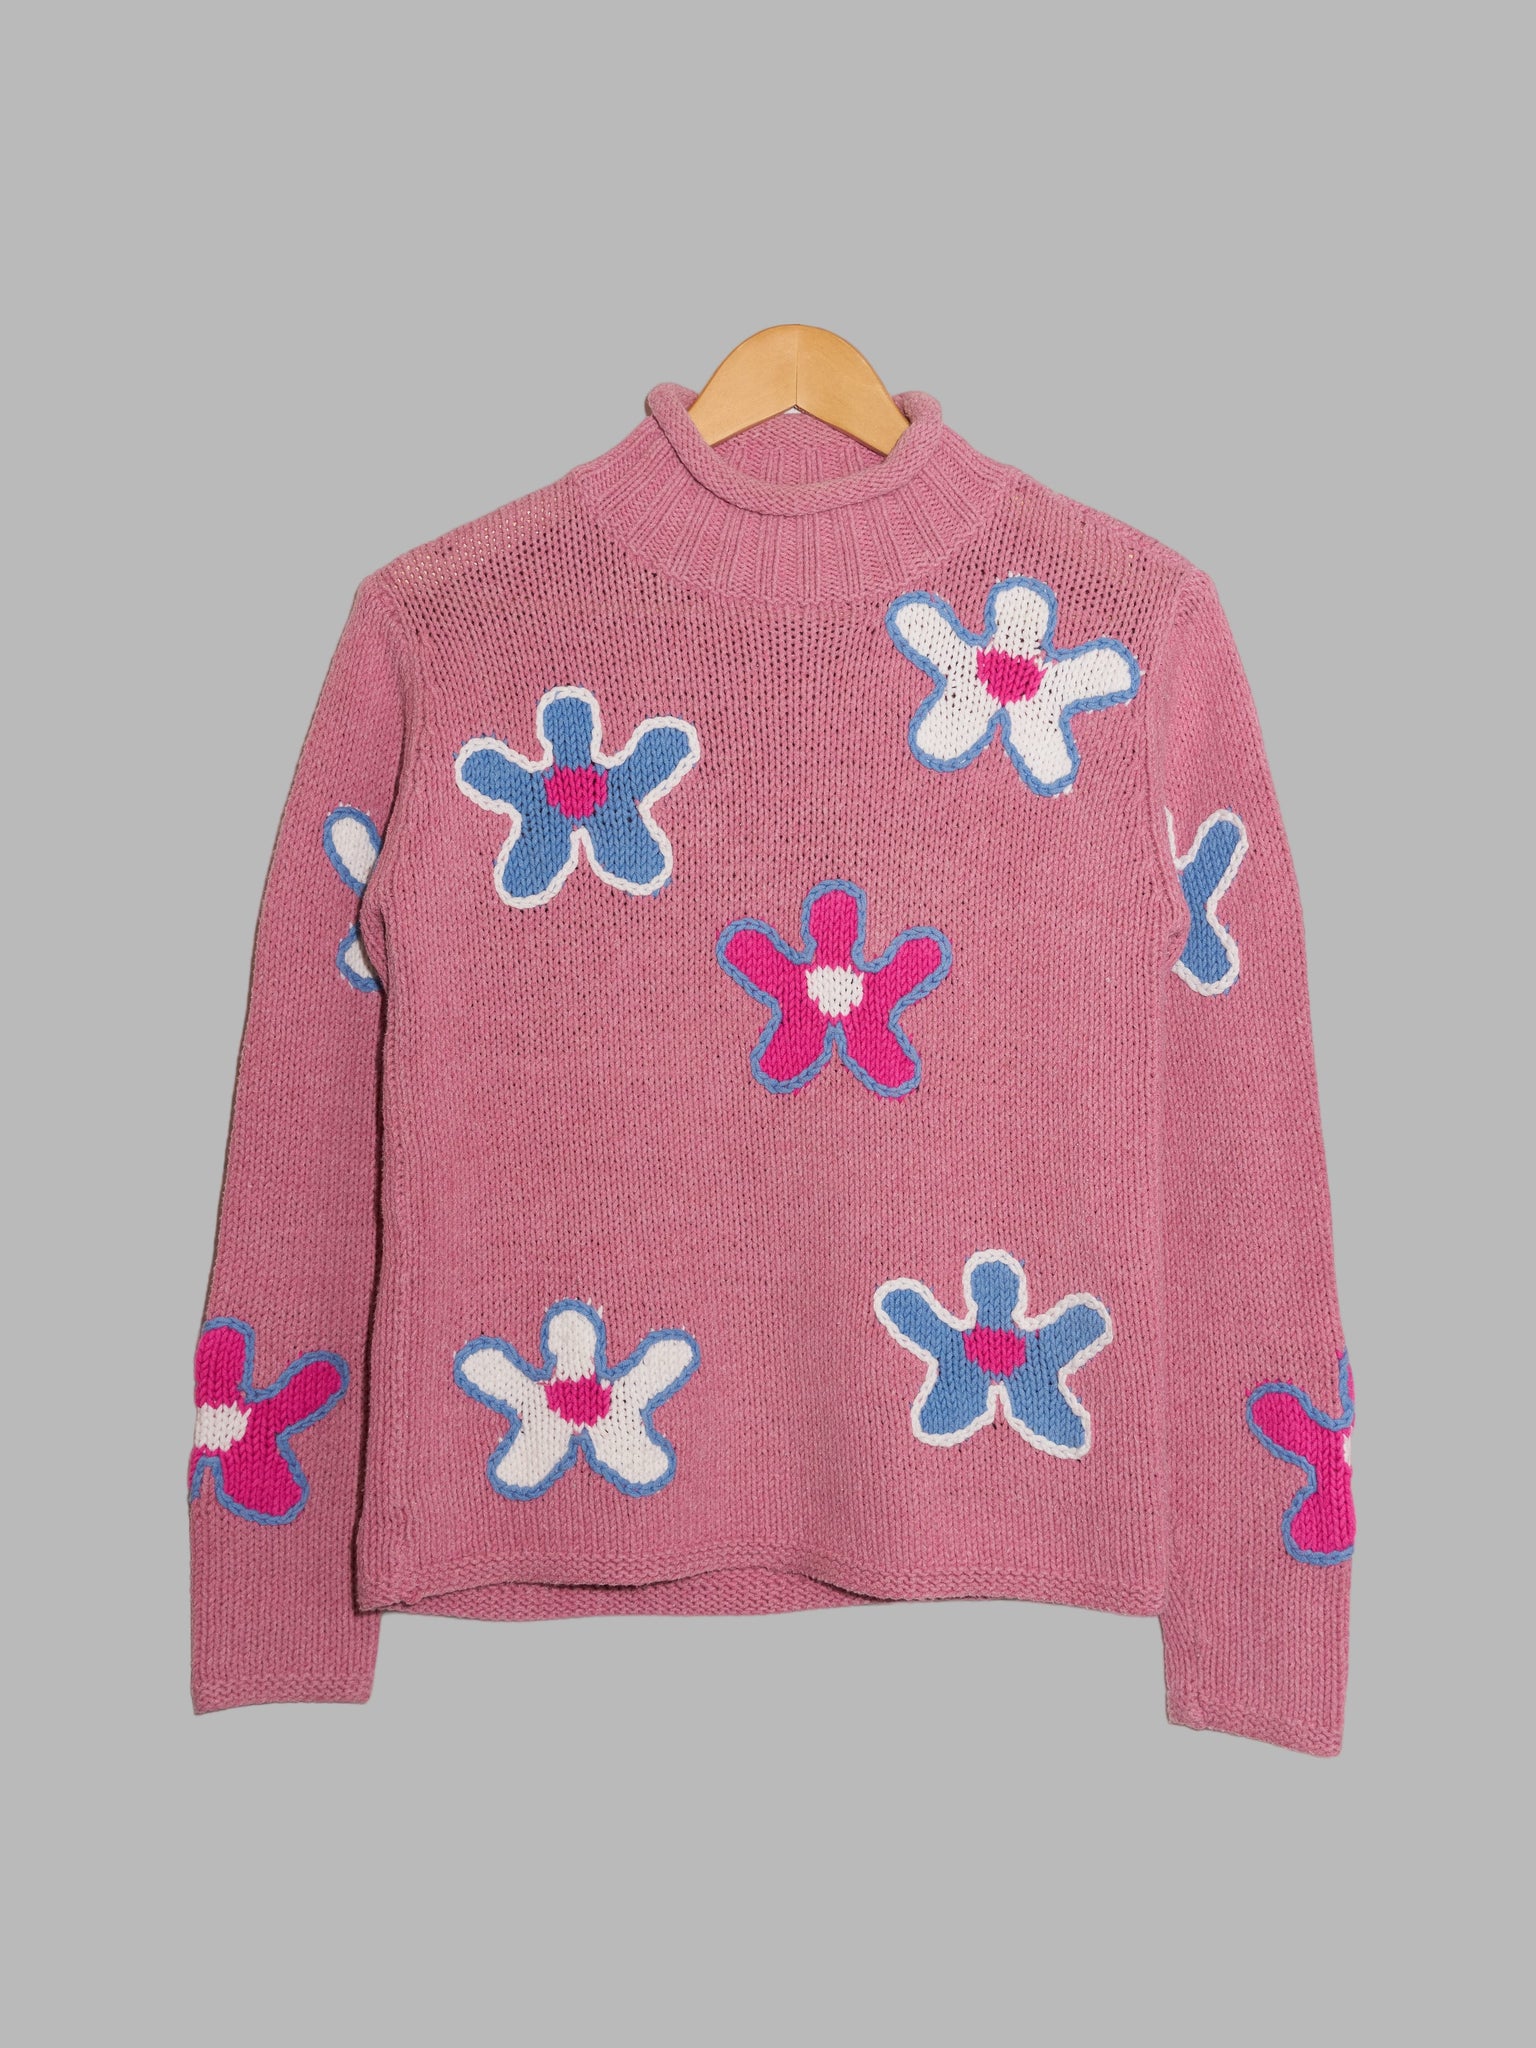 Patrick Cox Wannabe pink cotton blue and white flower mock neck jumper